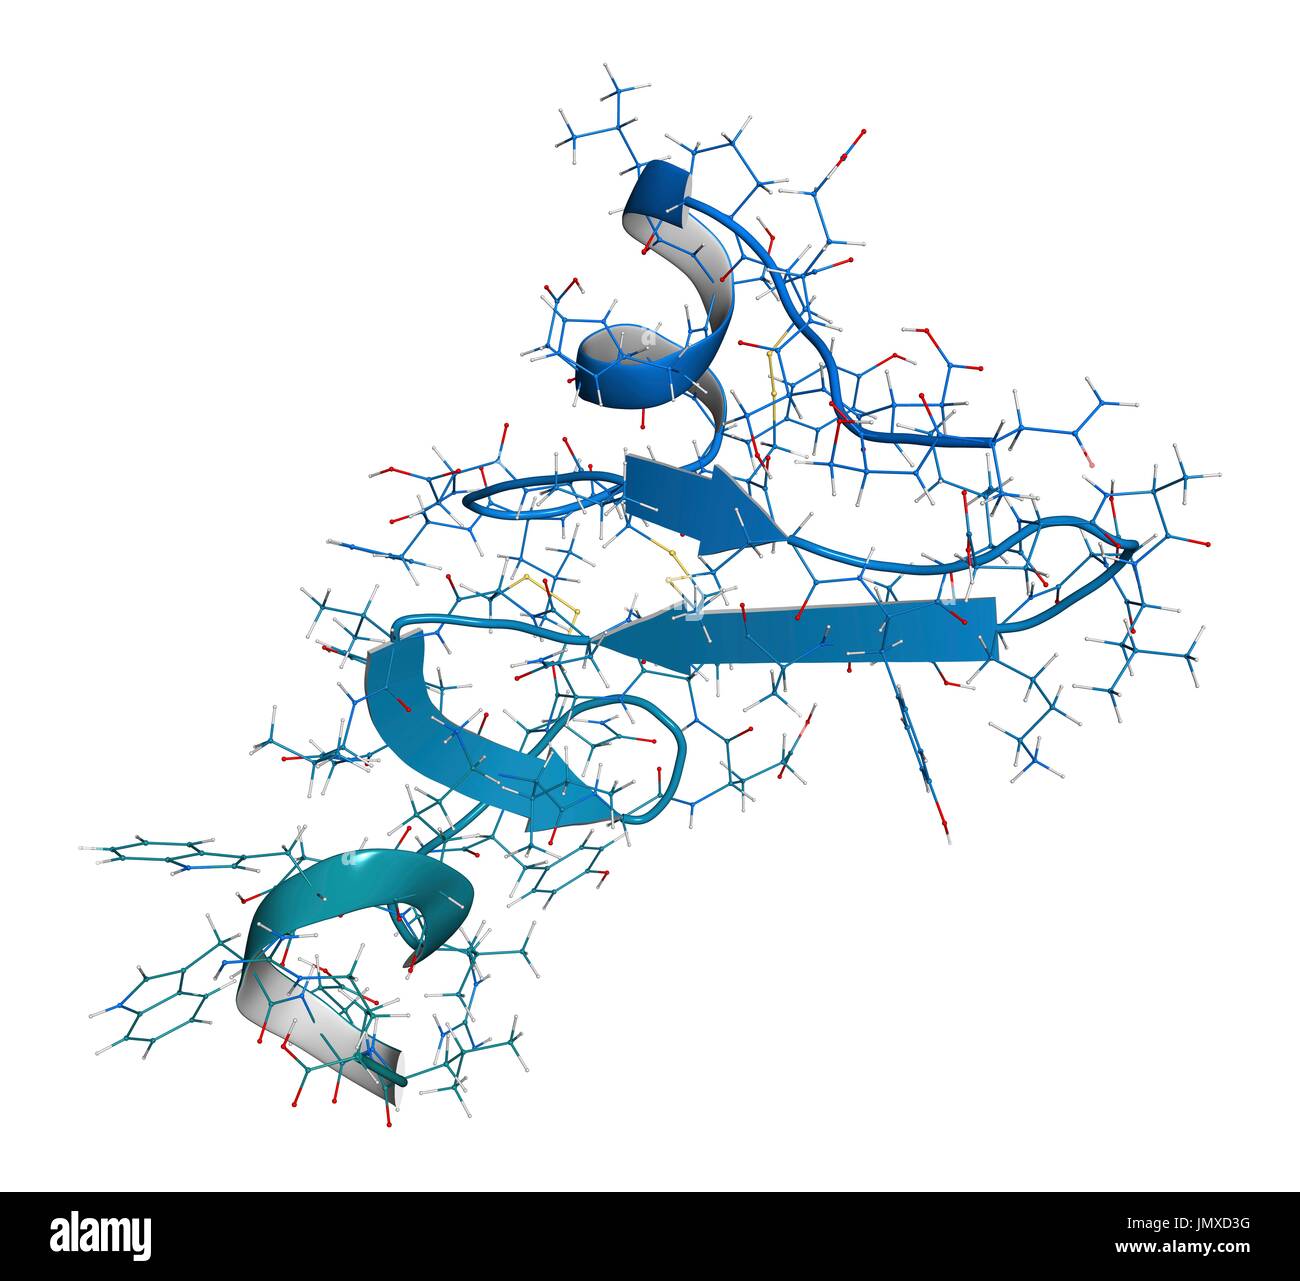 Epidermal growth factor (EGF) signalling protein molecule. Combined wireframe and cartoon model. Cartoon and carbon atoms: backbone gradient colouring (blue-teal); other atoms: conventional colour coding. Stock Photo